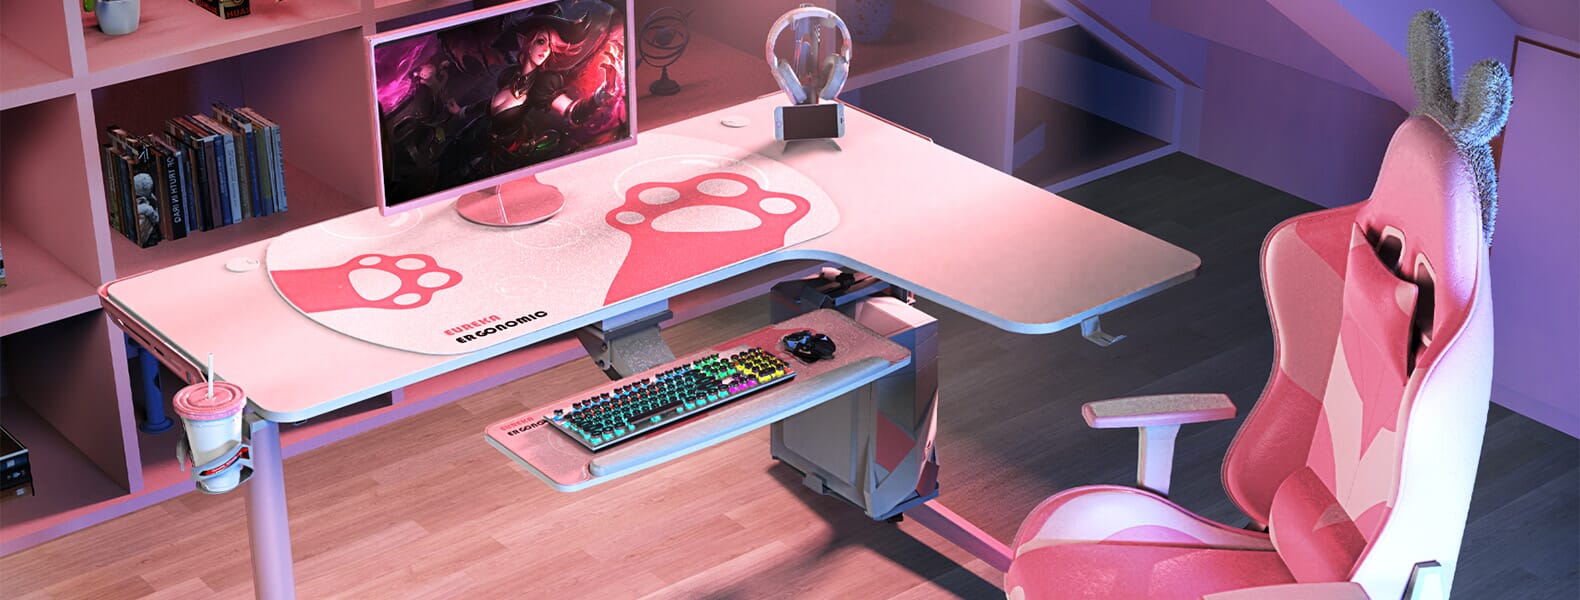 L60 Pink gaming setup with shelves and pink gaming chair desktop banner